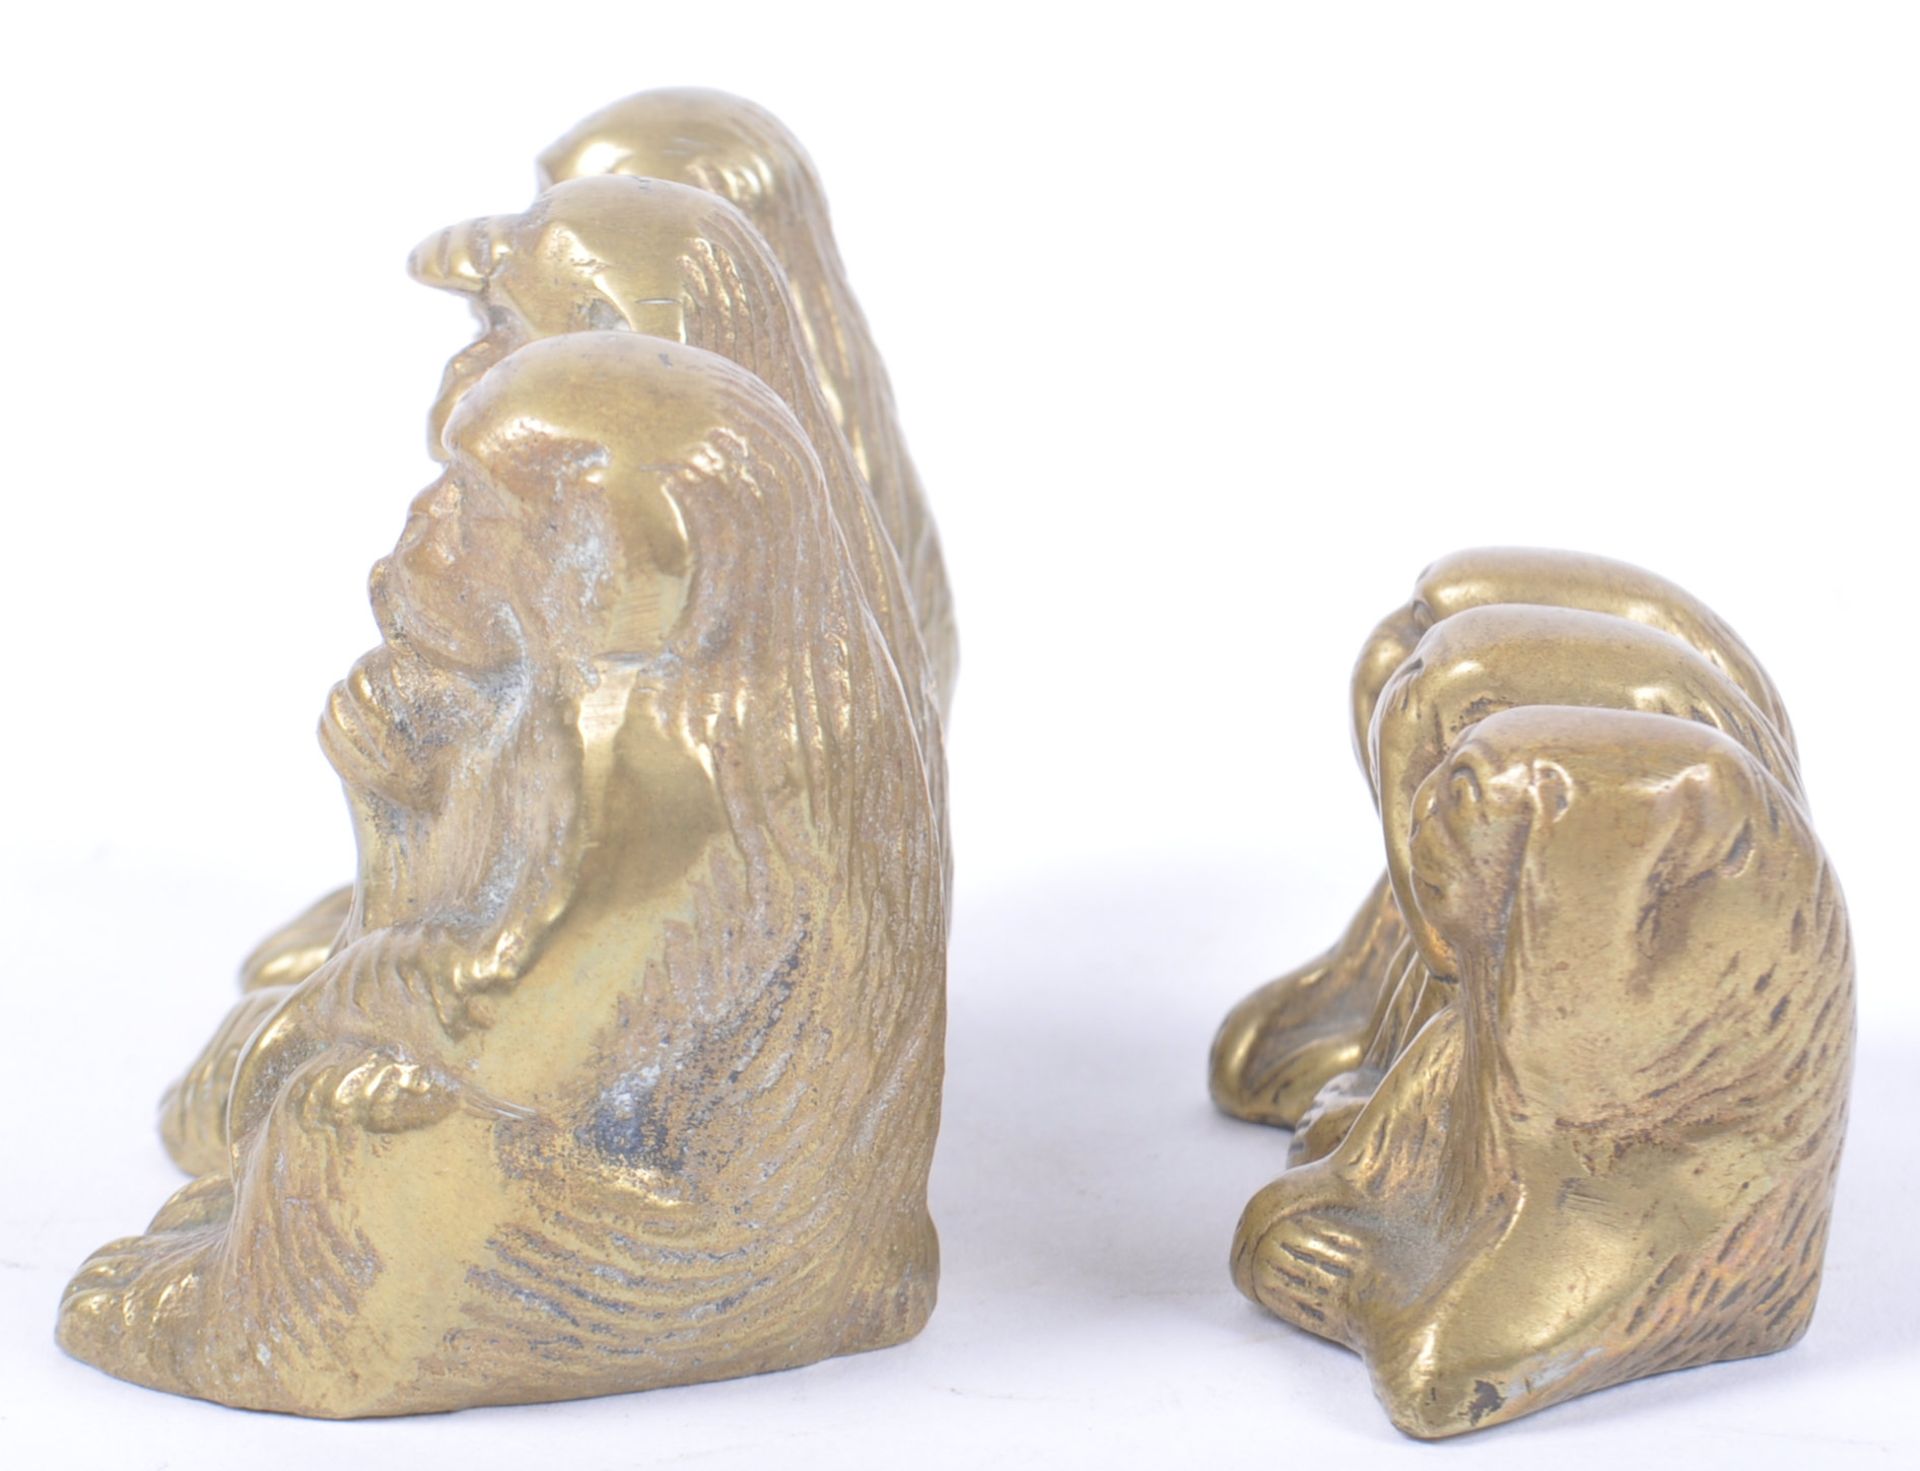 TWO 20TH CENTURY CHINESE MODELS OF THE THREE WISE MONKEYS - Image 2 of 4